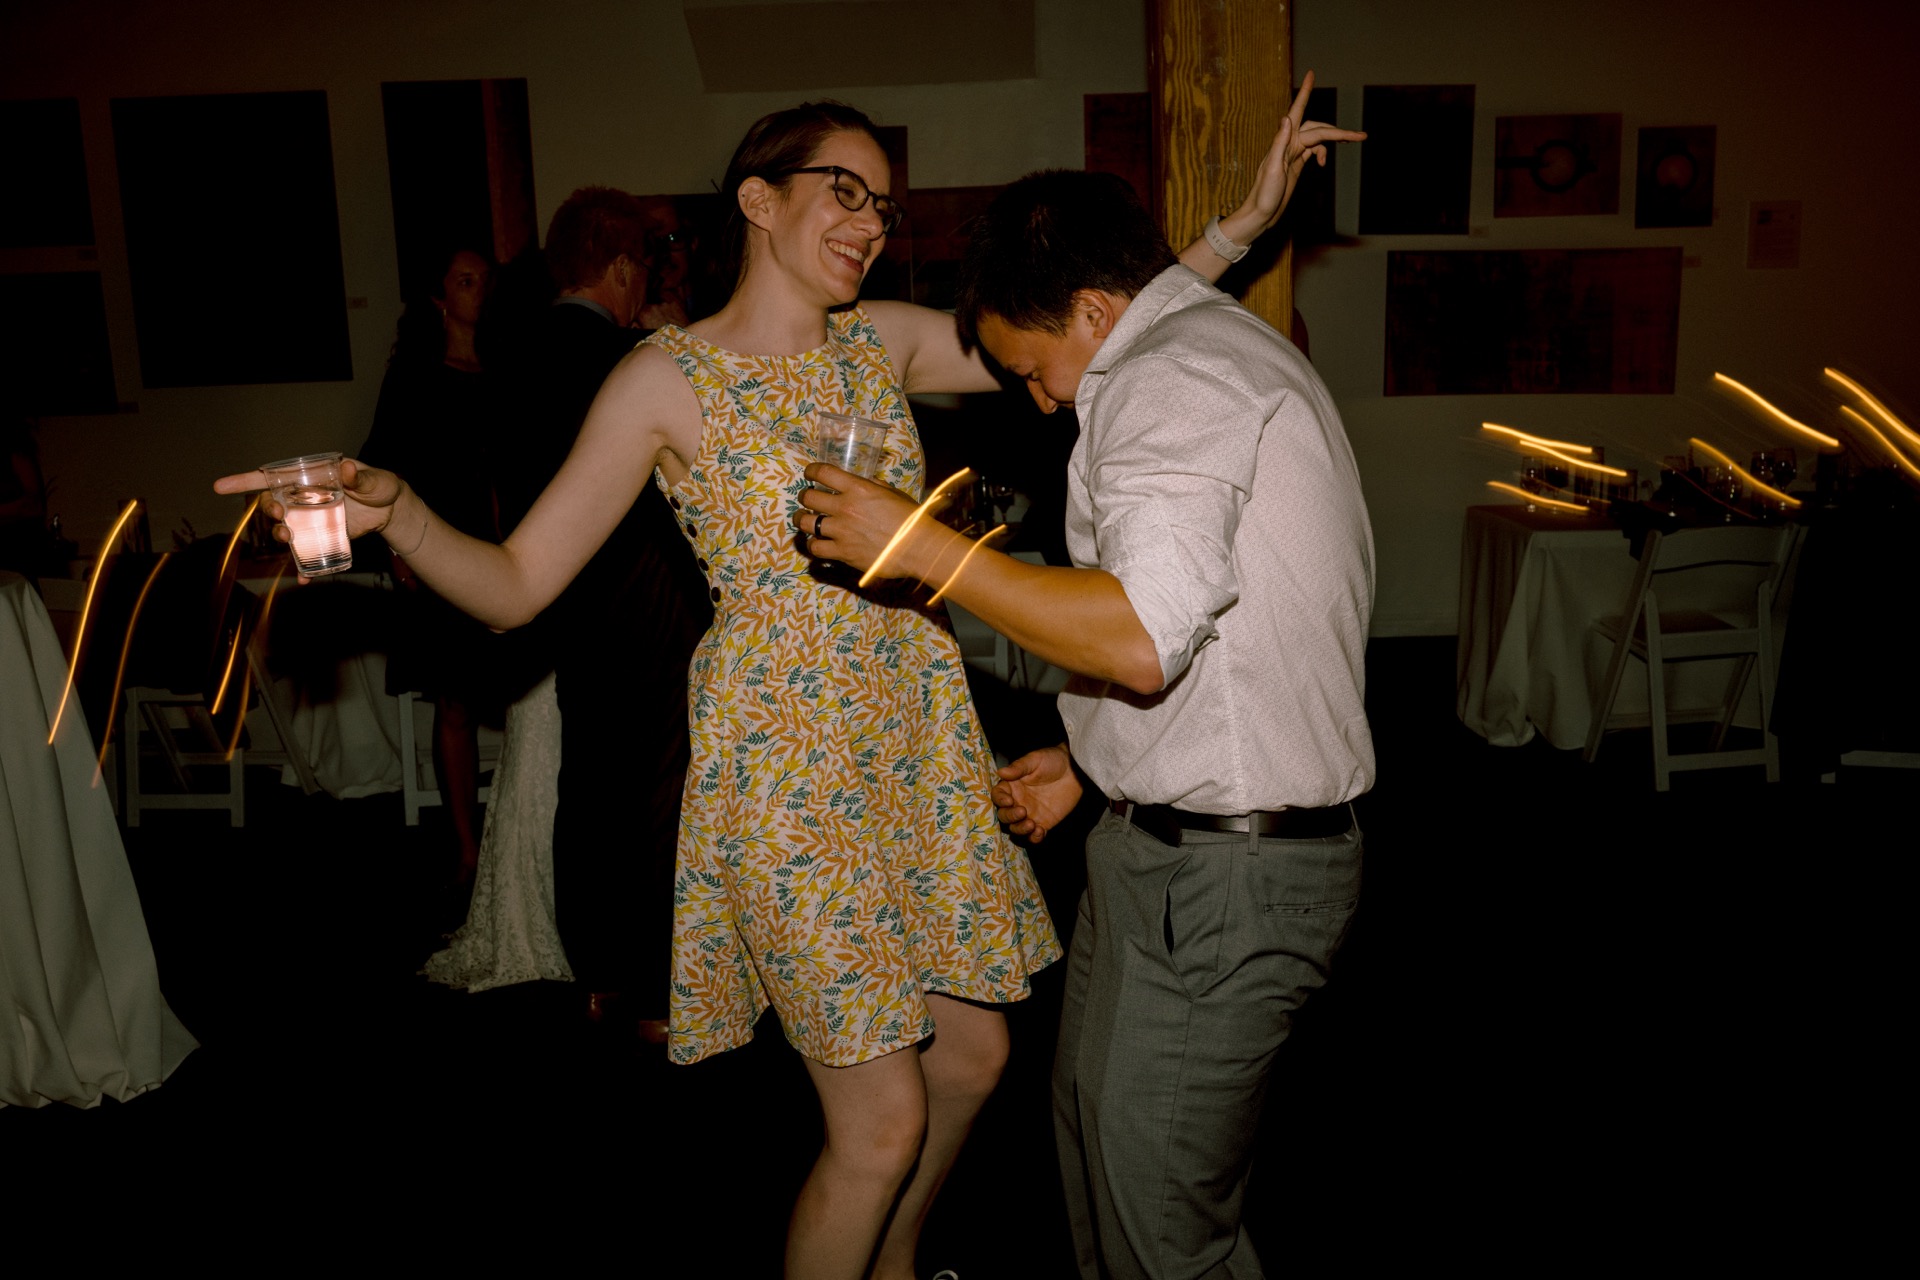 A couple dancing in a dimly lit room with motion blur effects.